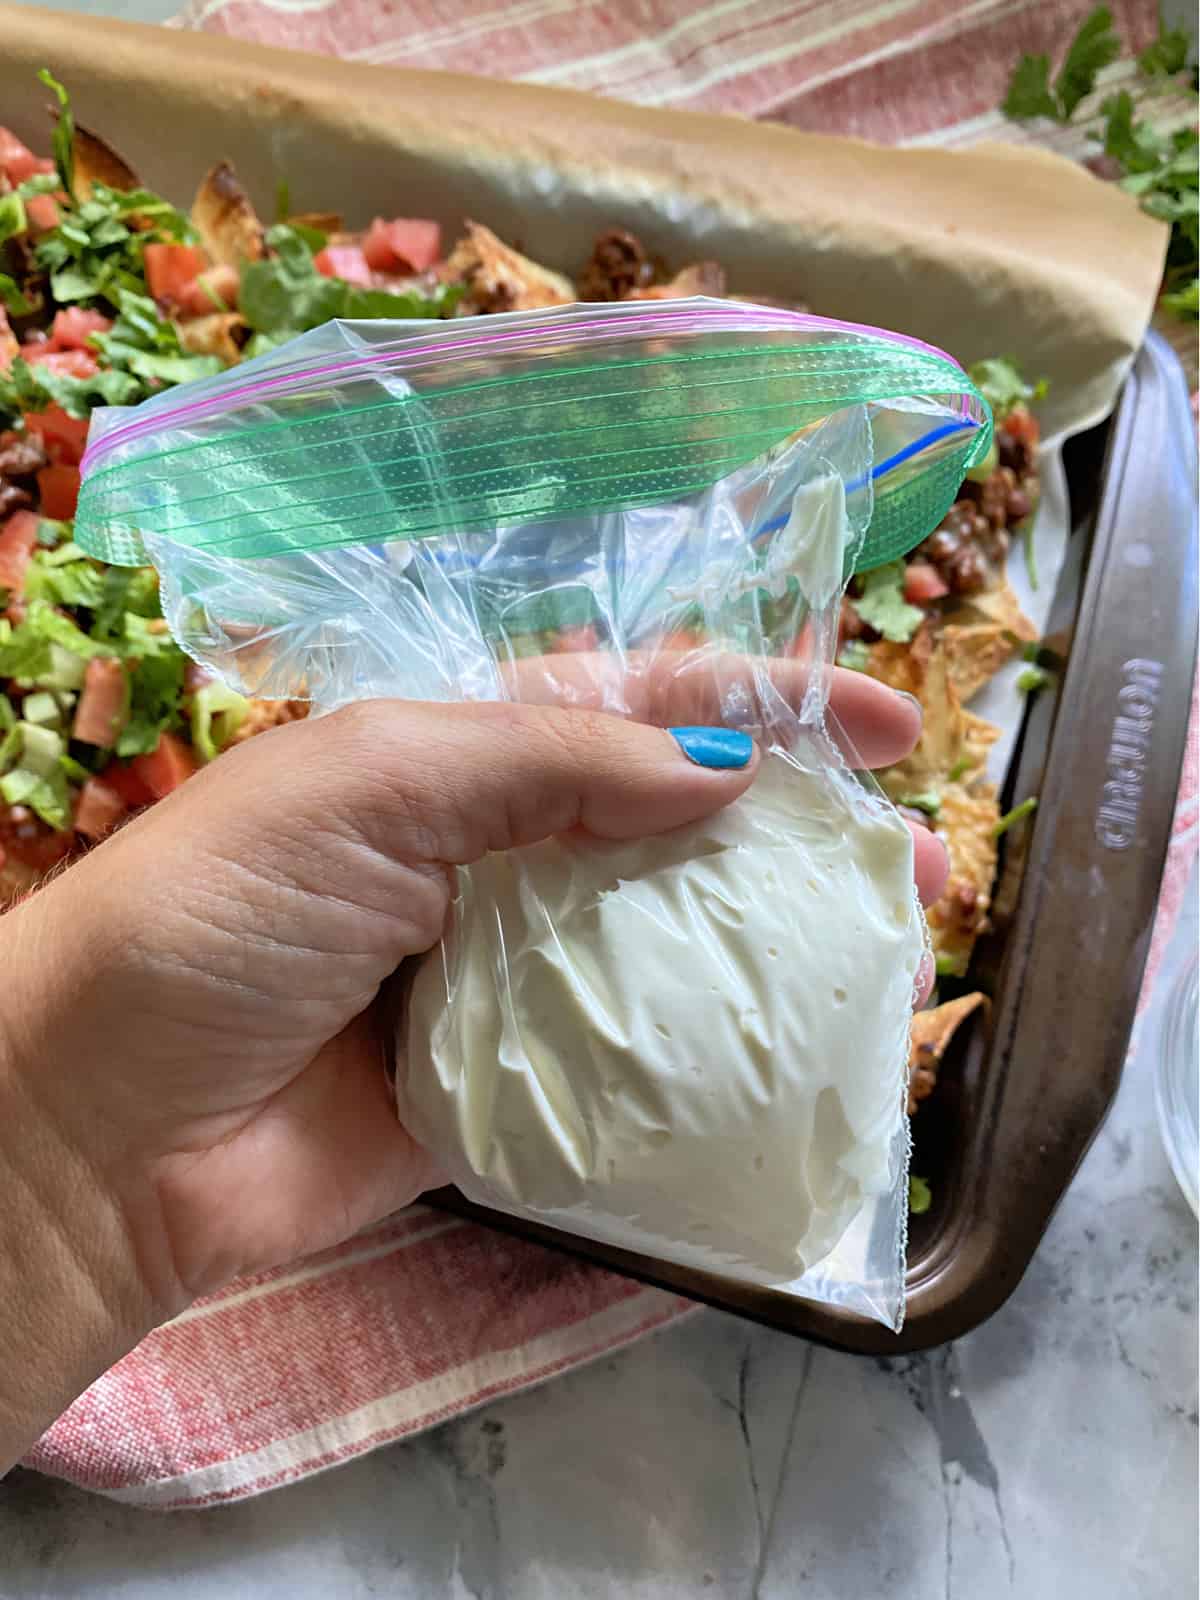 Sour cream in a ziploc baggy with nachos in the background.